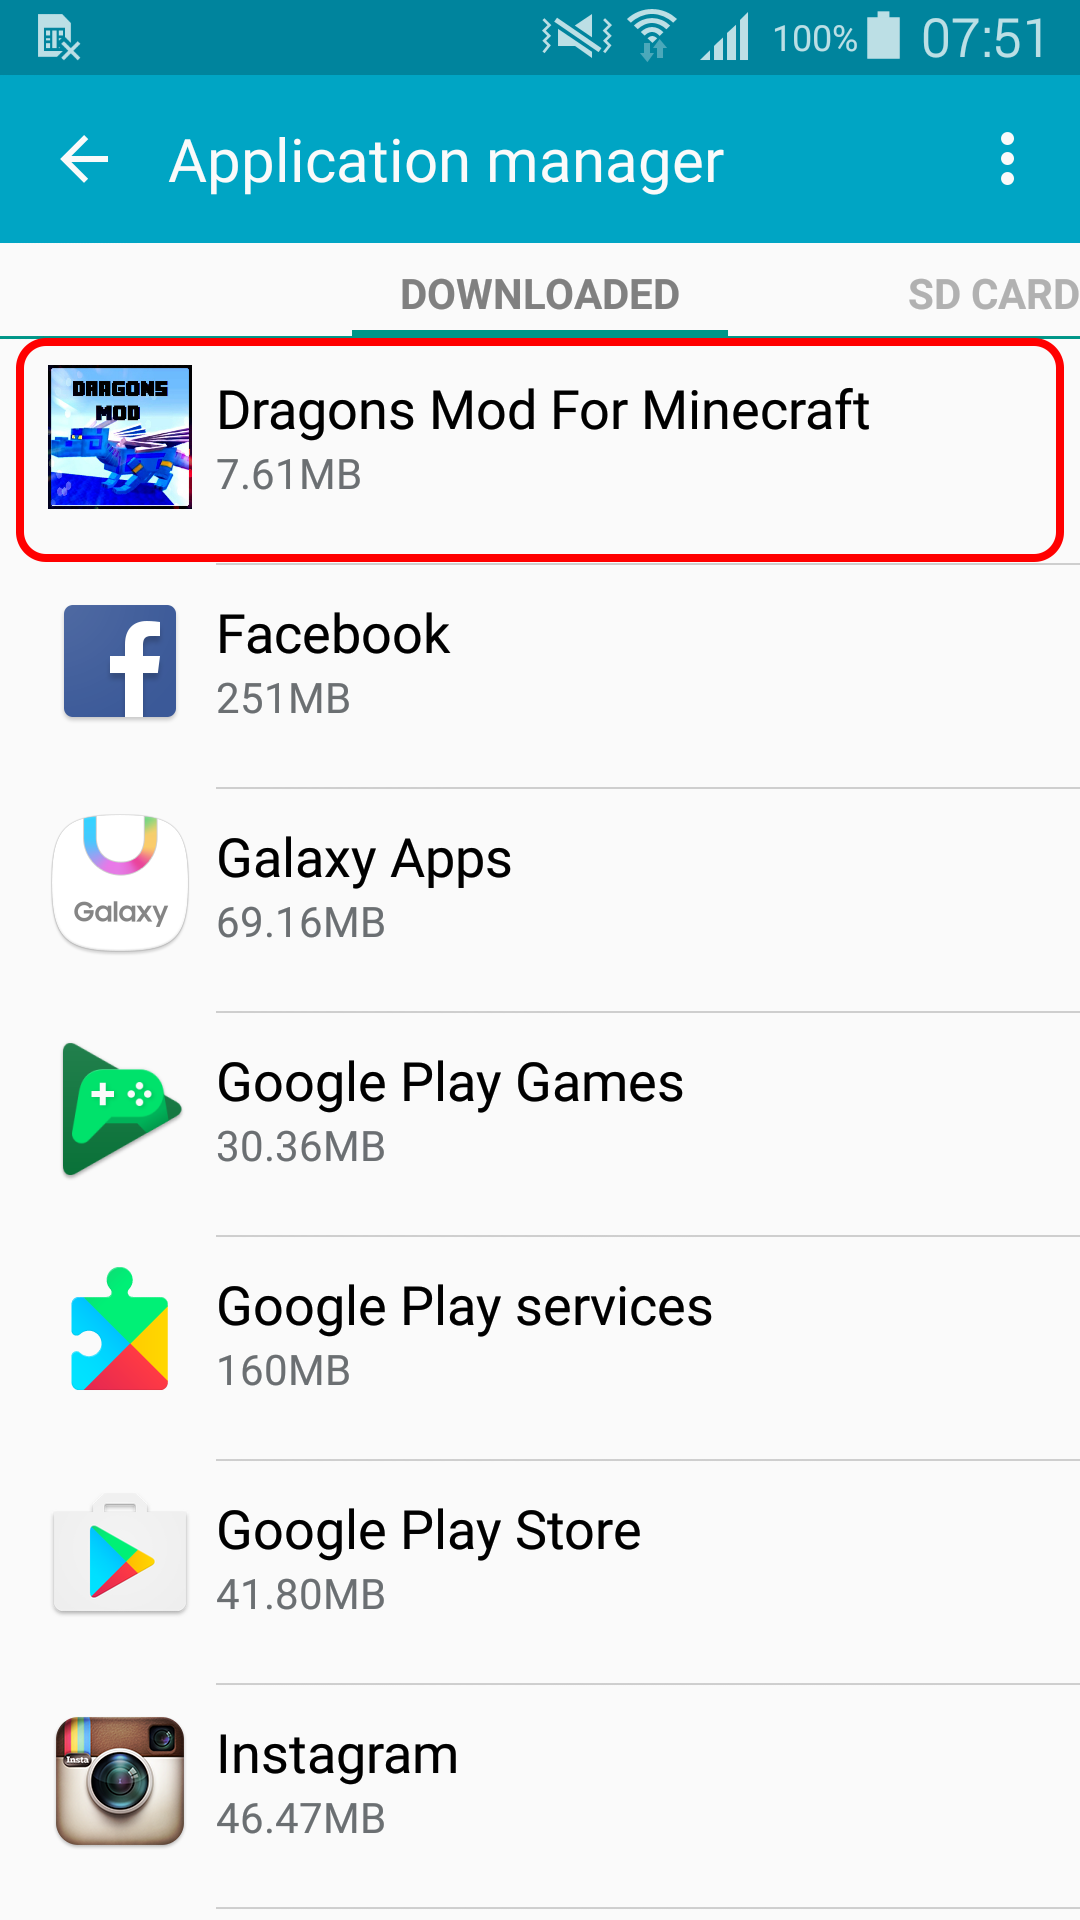 Industry mod for mcpe - Apps on Google Play